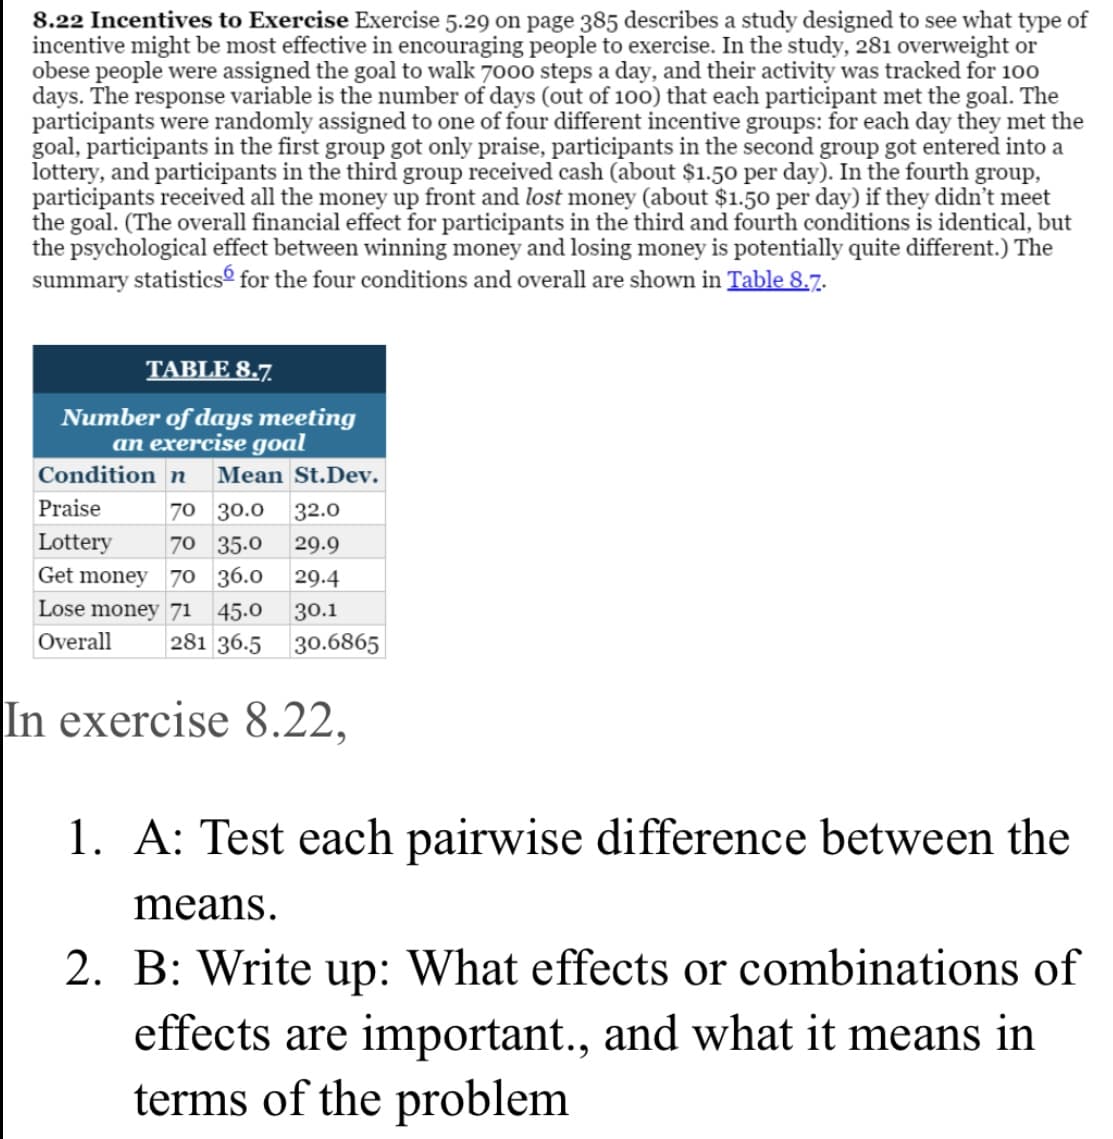 8.22 Incentives to Exercise Exercise 5.29 on page 385 describes a study designed to see what type of
incentive might be most effective in encouraging people to exercise. In the study, 281 overweight or
obese people were assigned the goal to walk 700o steps a day, and their activity was tracked for 100
days. The response variable is the number of days (out of 100) that each participant met the goal. The
participants were randomly assigned to one of four different incentive groups: for each day they met the
goal, participants in the first group got only praise, participants in the second group got entered into a
lottery, and participants in the third group received cash (about $1.50 per day). In the fourth group,
participants received all the money up front and lost money (about $1.50 per day) if they didn't meet
the goal. (The overall financial effect for participants in the third and fourth conditions is identical, but
the psychological effect between winning money and losing money is potentially quite different.) The
summary statisticsé for the four conditions and overall are shown in Table 8.7.
TABLE 8.7.
Number of days meeting
an exercise goal
Condition n
Mean St.Dev.
Praise
70 30.0
32.0
Lottery
70 35.0
29.9
Get money
70 36.0
29.4
Lose money 71
45.0
30.1
281 36.5
Overall
30.6865
In exercise 8.22,
1. A: Test each pairwise difference between the
means.
2. B: Write up: What effects or combinations of
effects are important., and what it means in
terms of the problem
